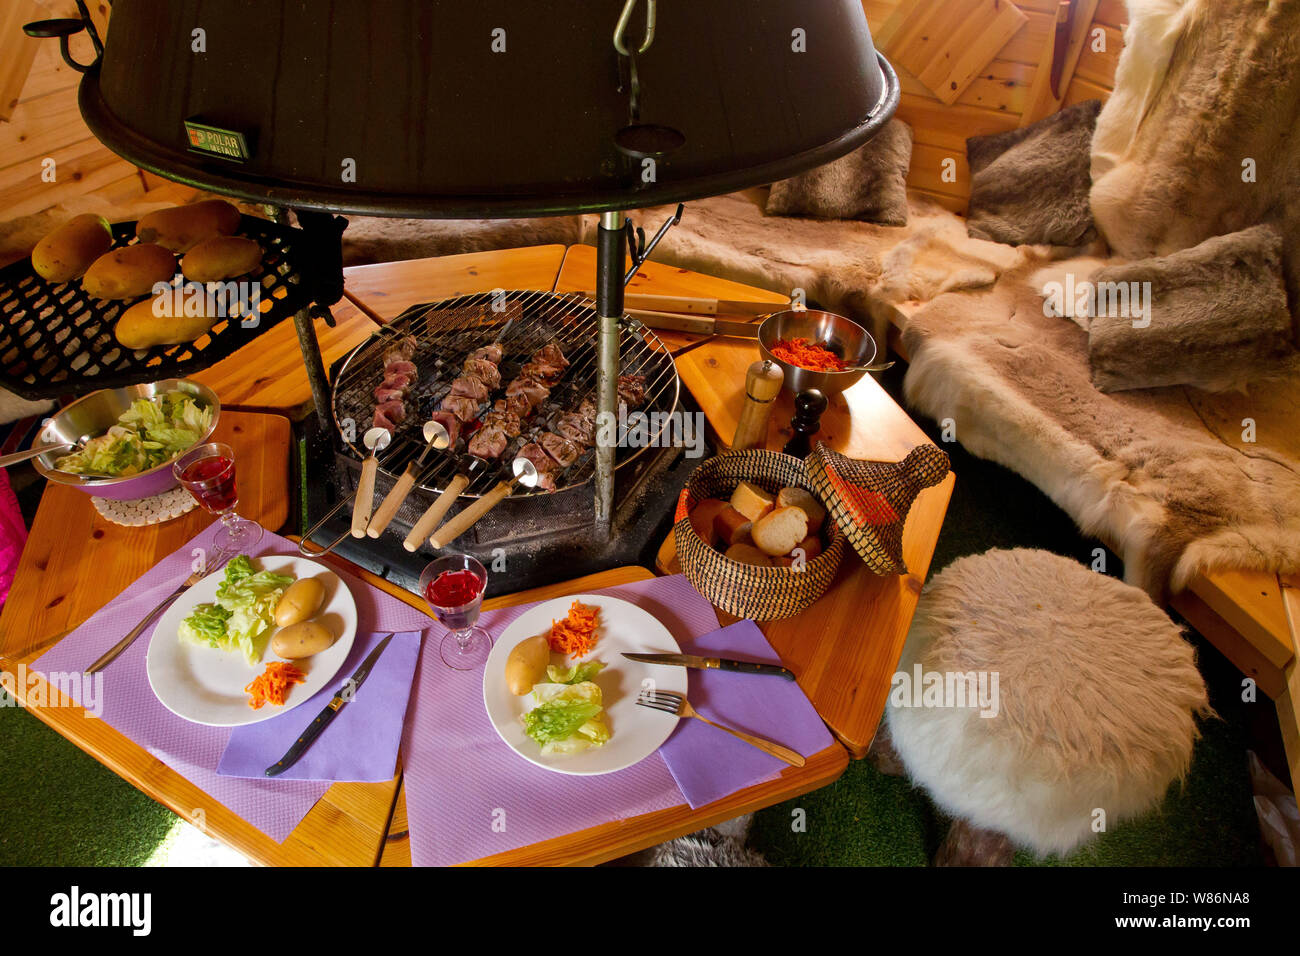 Grilled food and meal in a Finnish kota Stock Photo